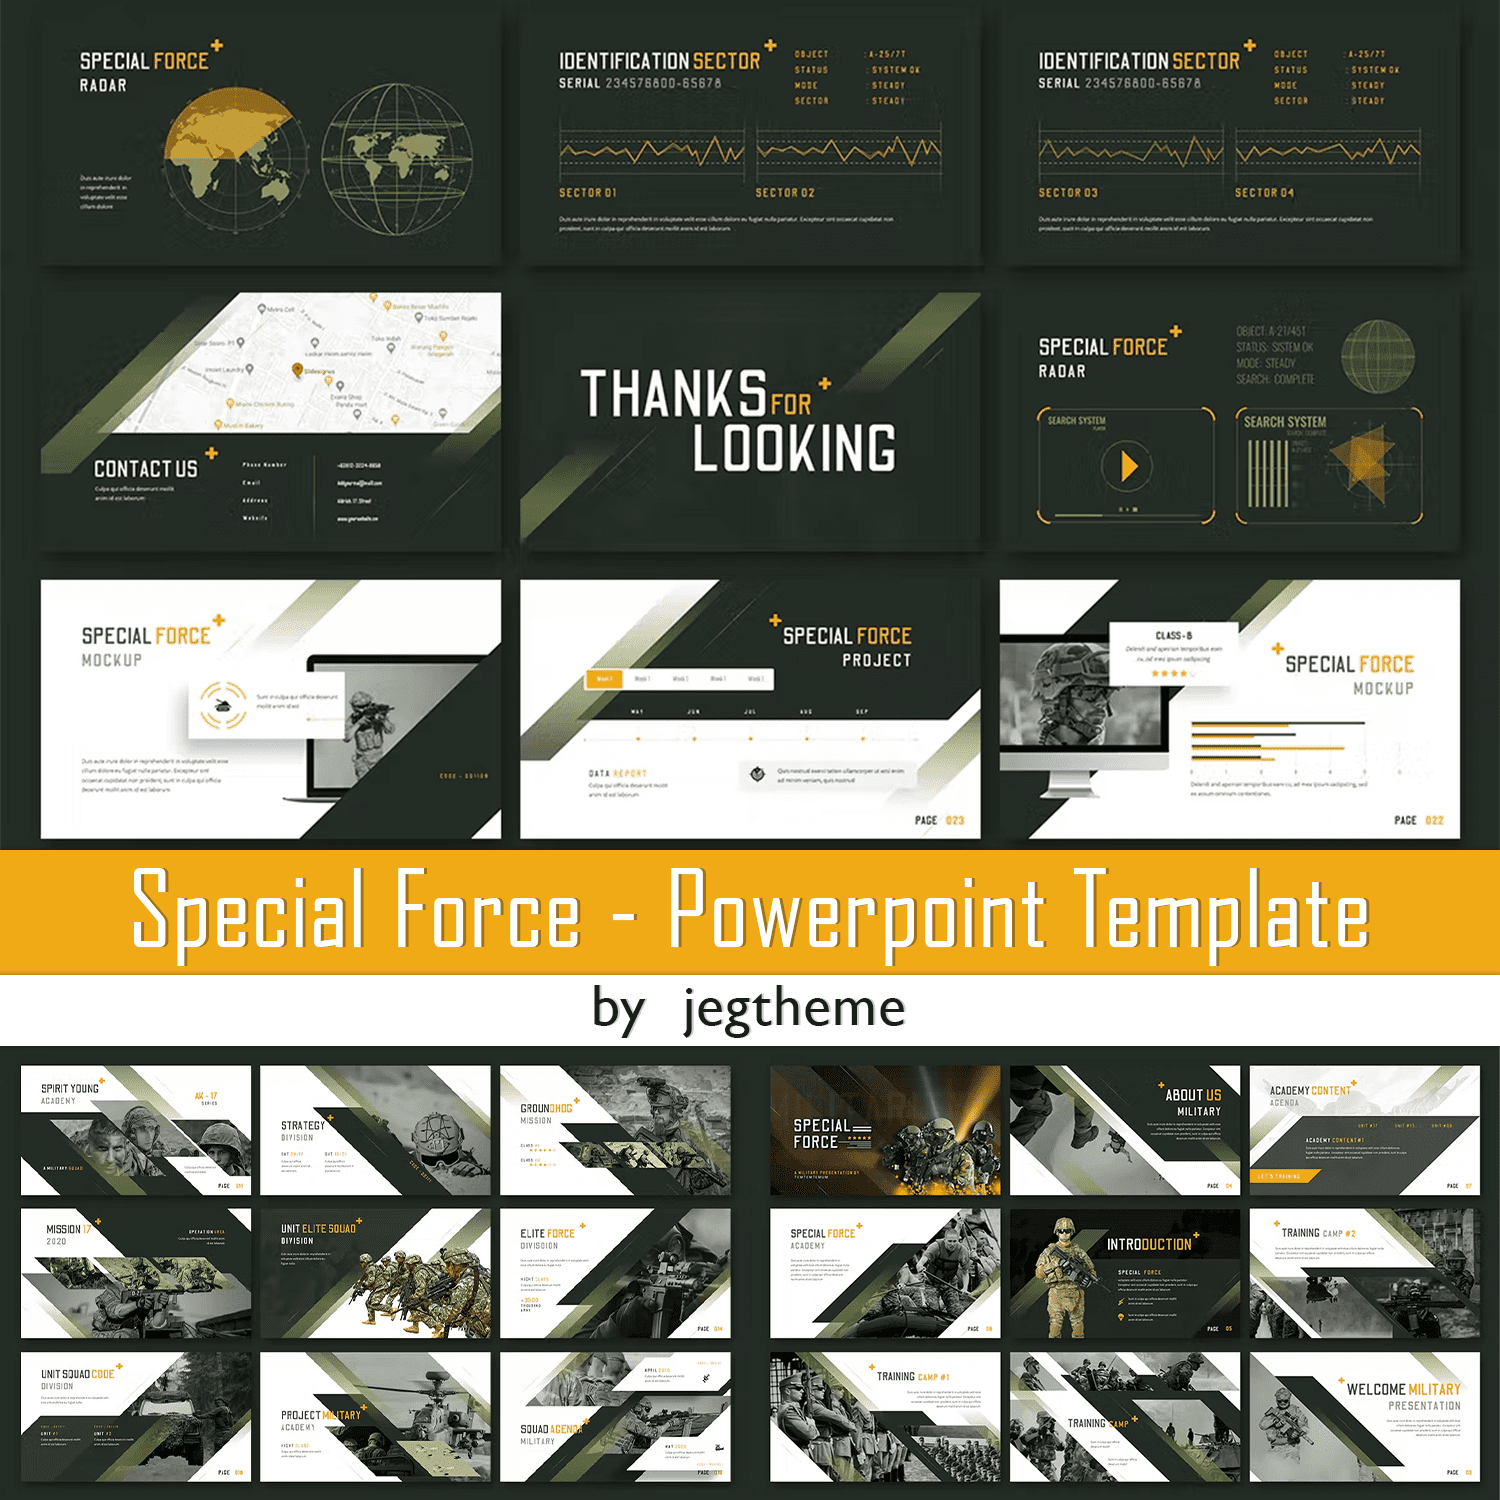 Special Force - Powerpoint Template Cover.